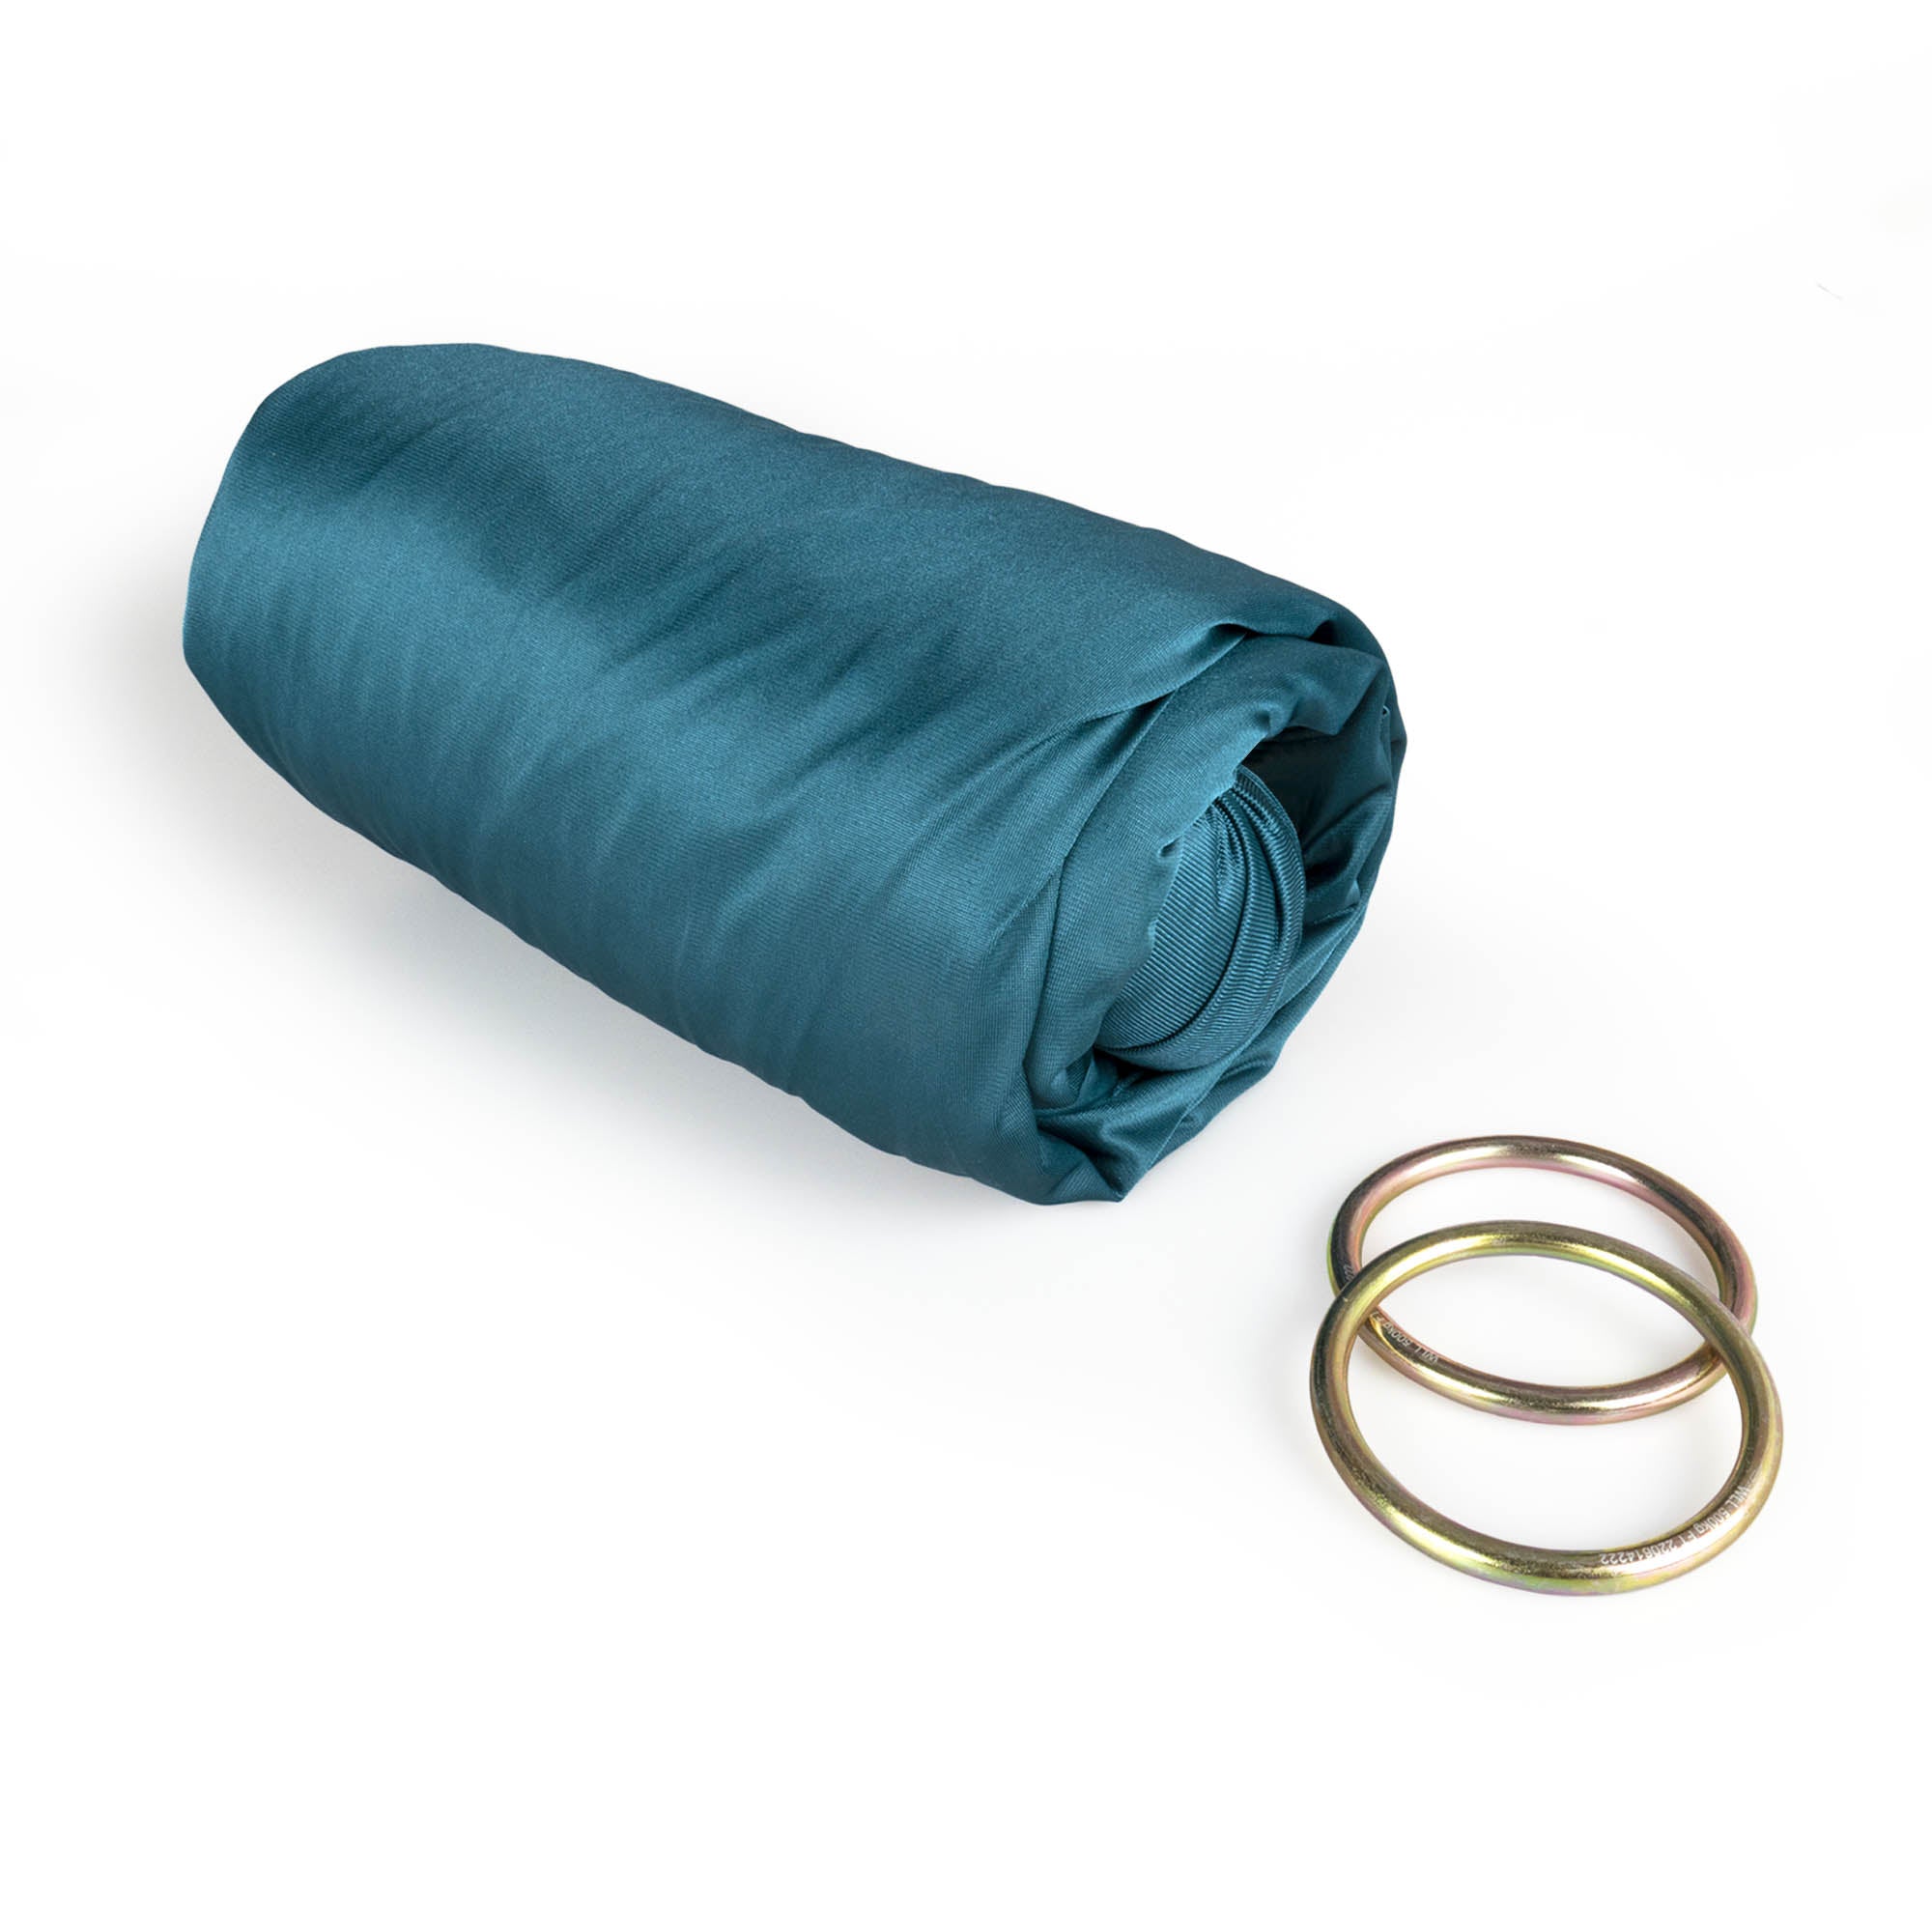 Pine green yoga hammock rolled up with rings detached